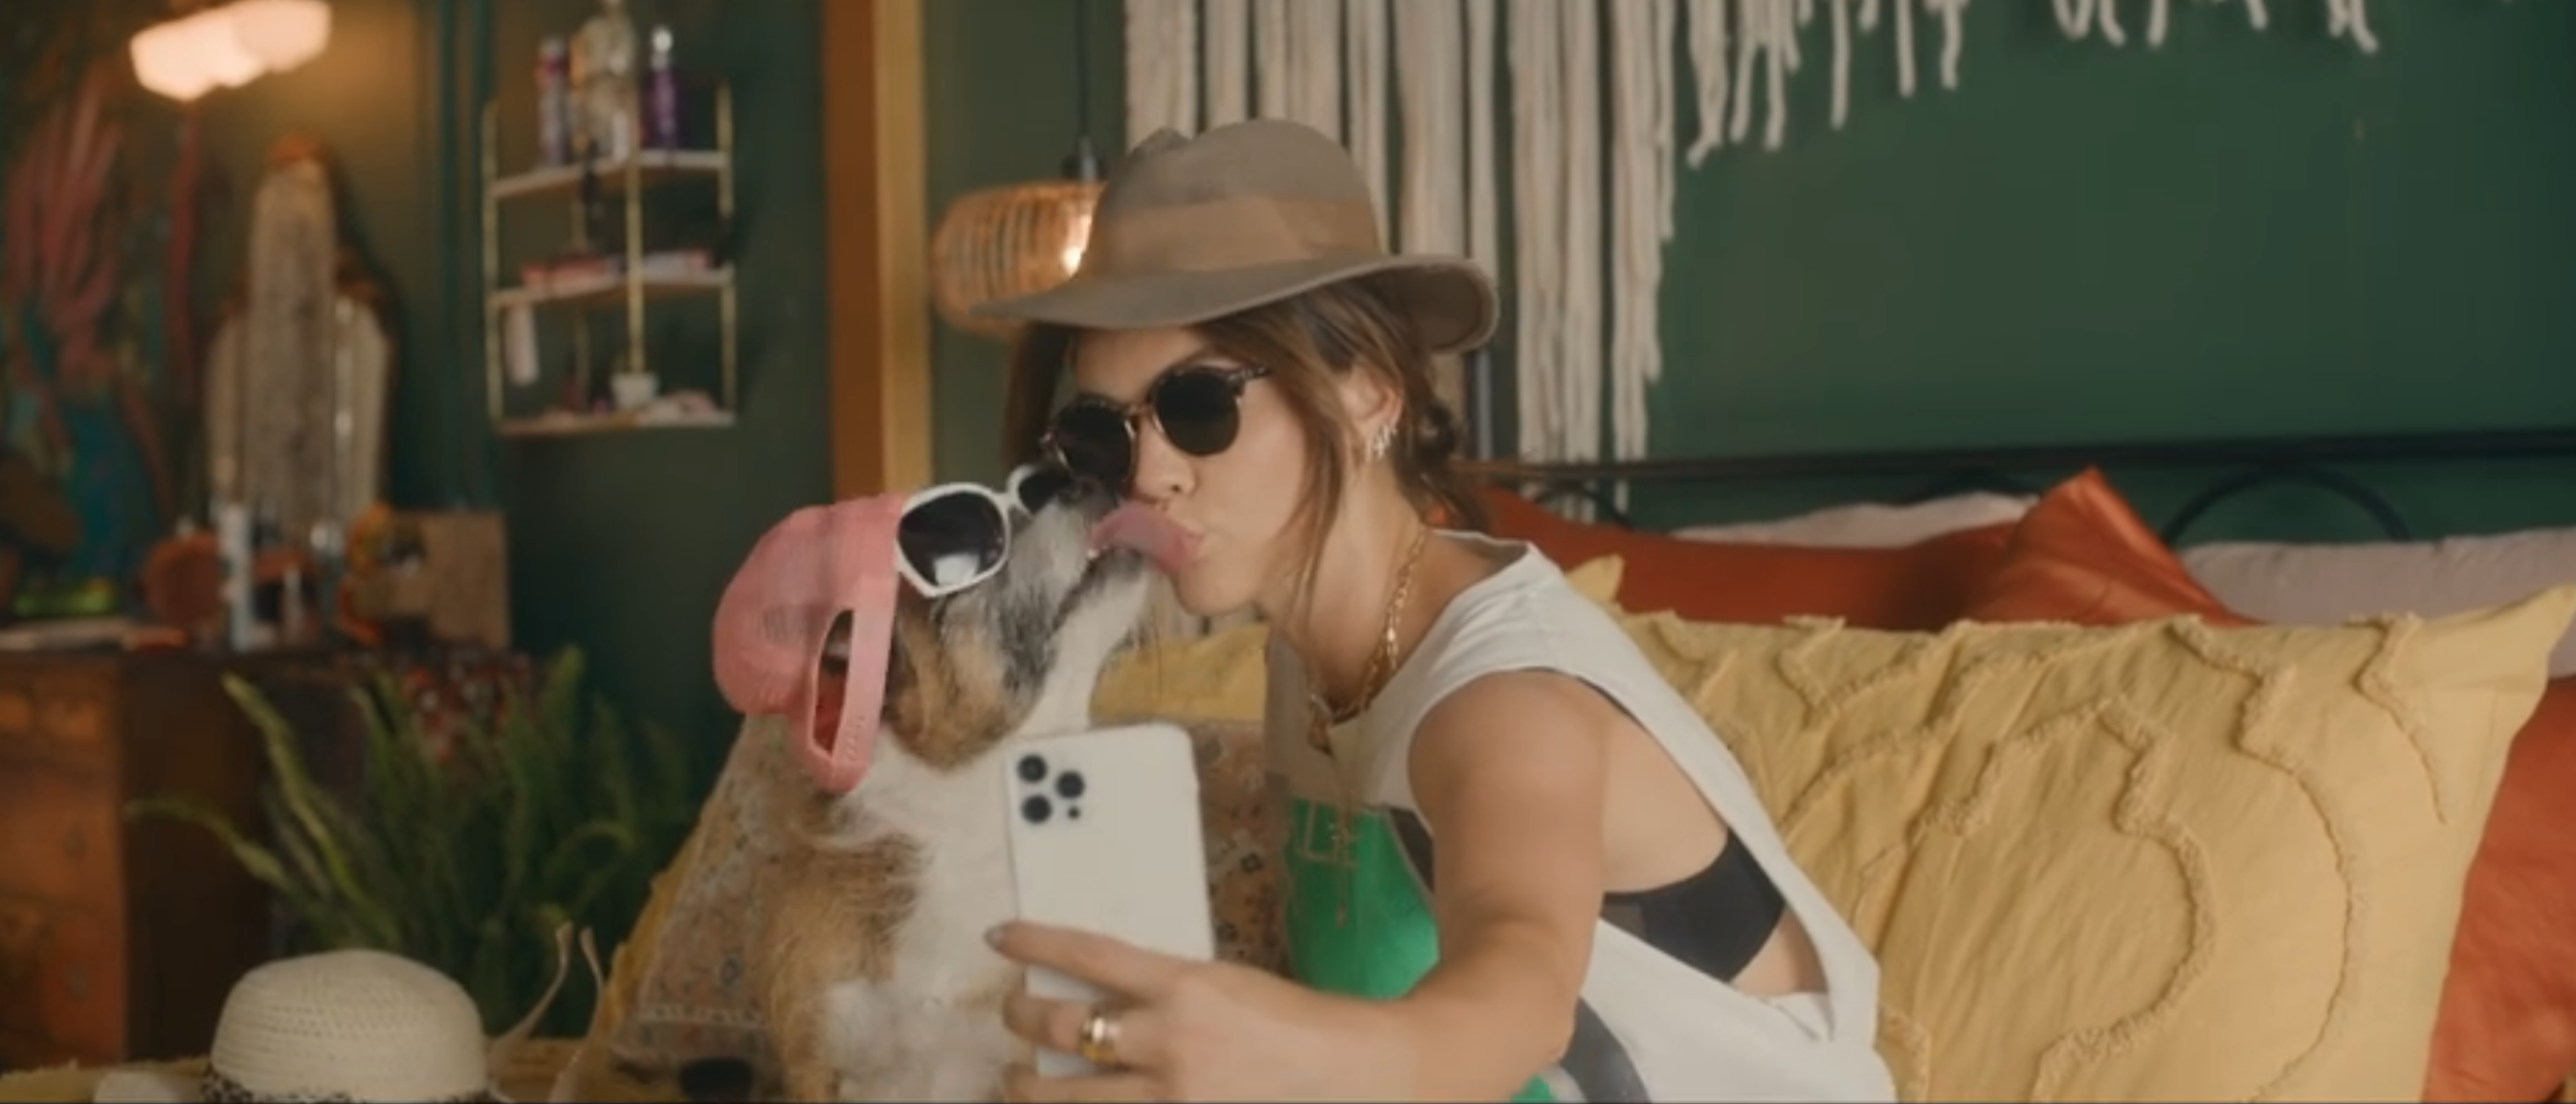 lucy hale taking selfie with dog in hat and sunglasses, it licks her face